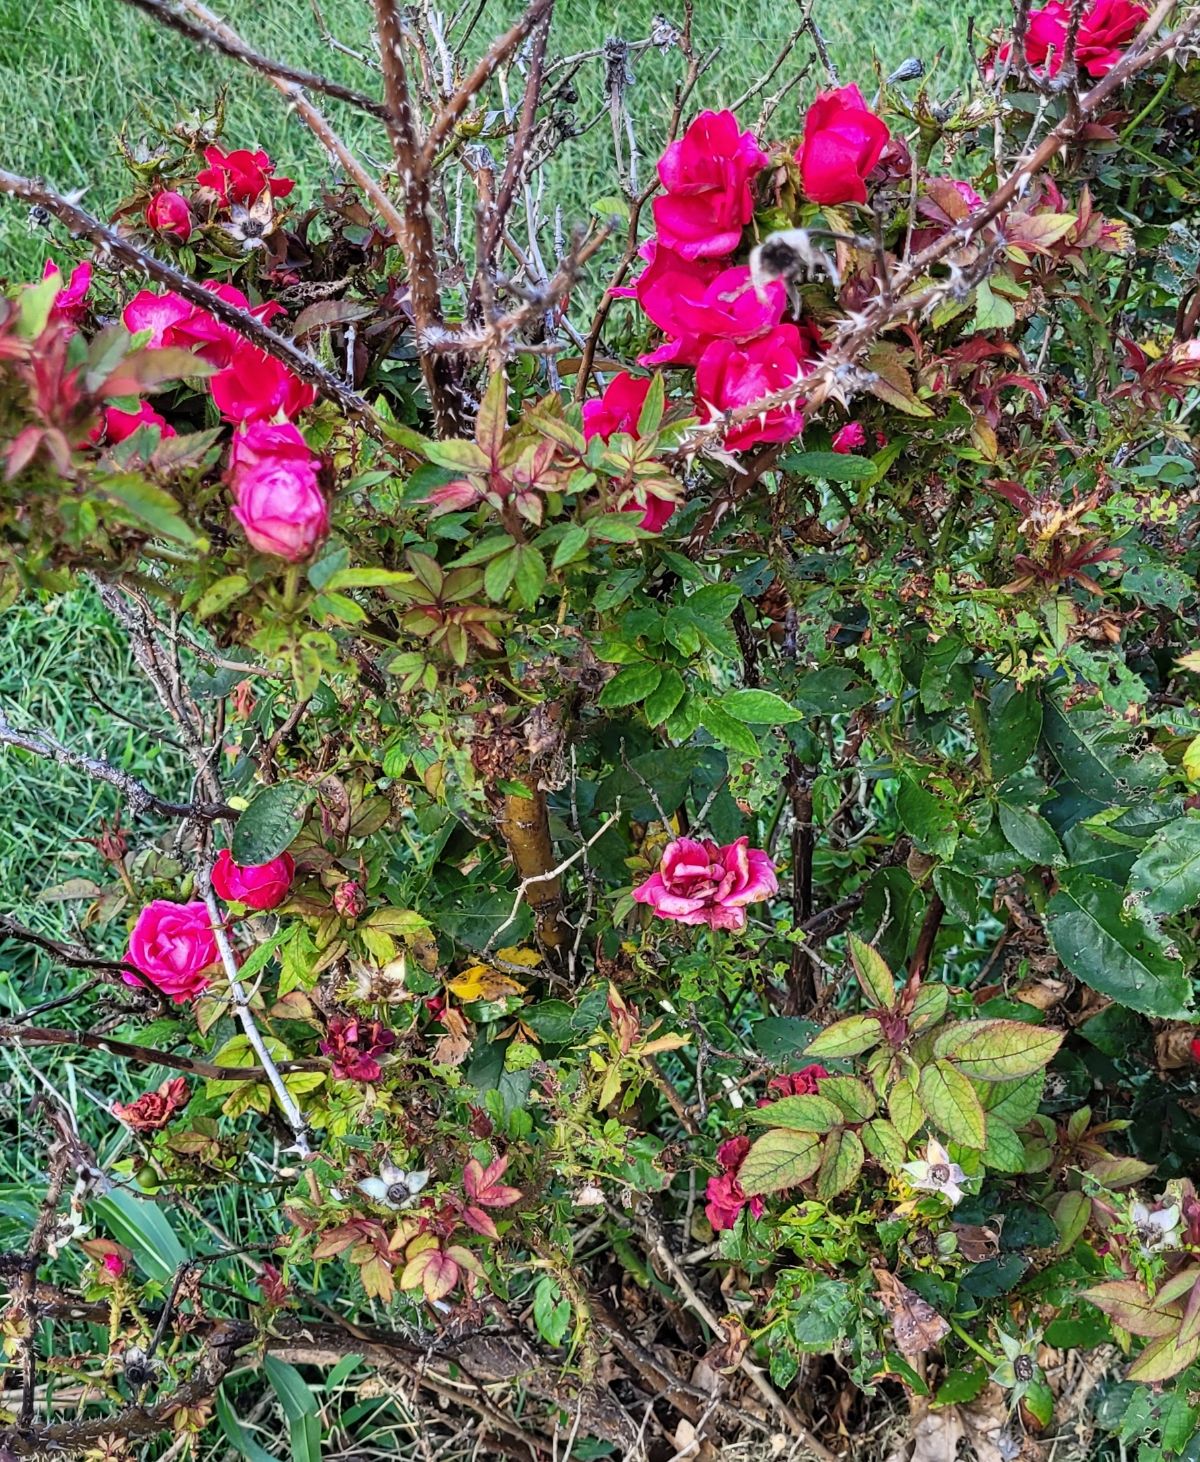 A rose badly infected with Rose Rosette Disease